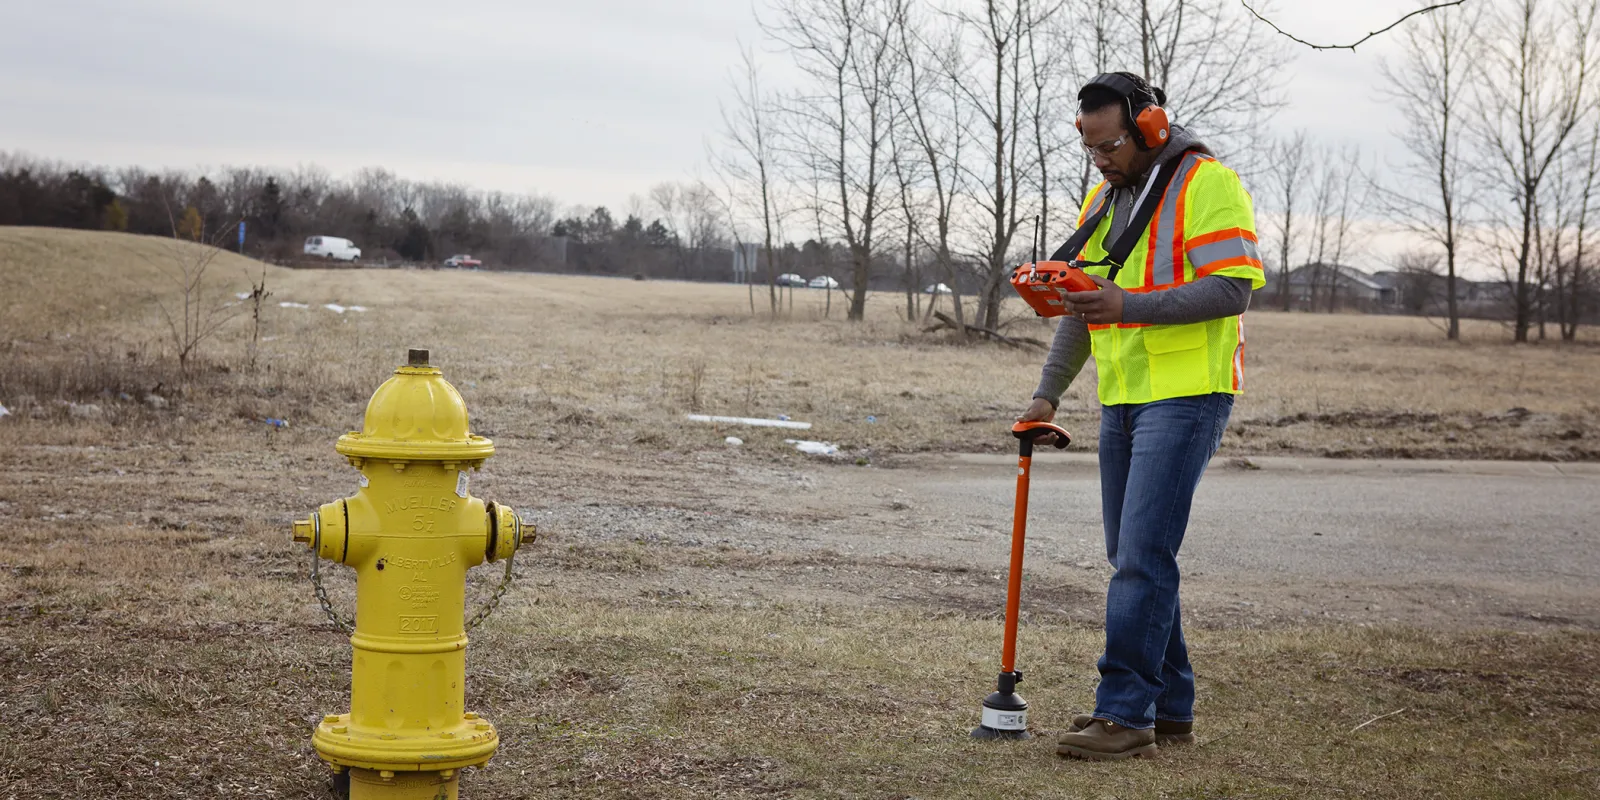 Man near fire hydrant performing underground utility location services for a leak survey or water audit